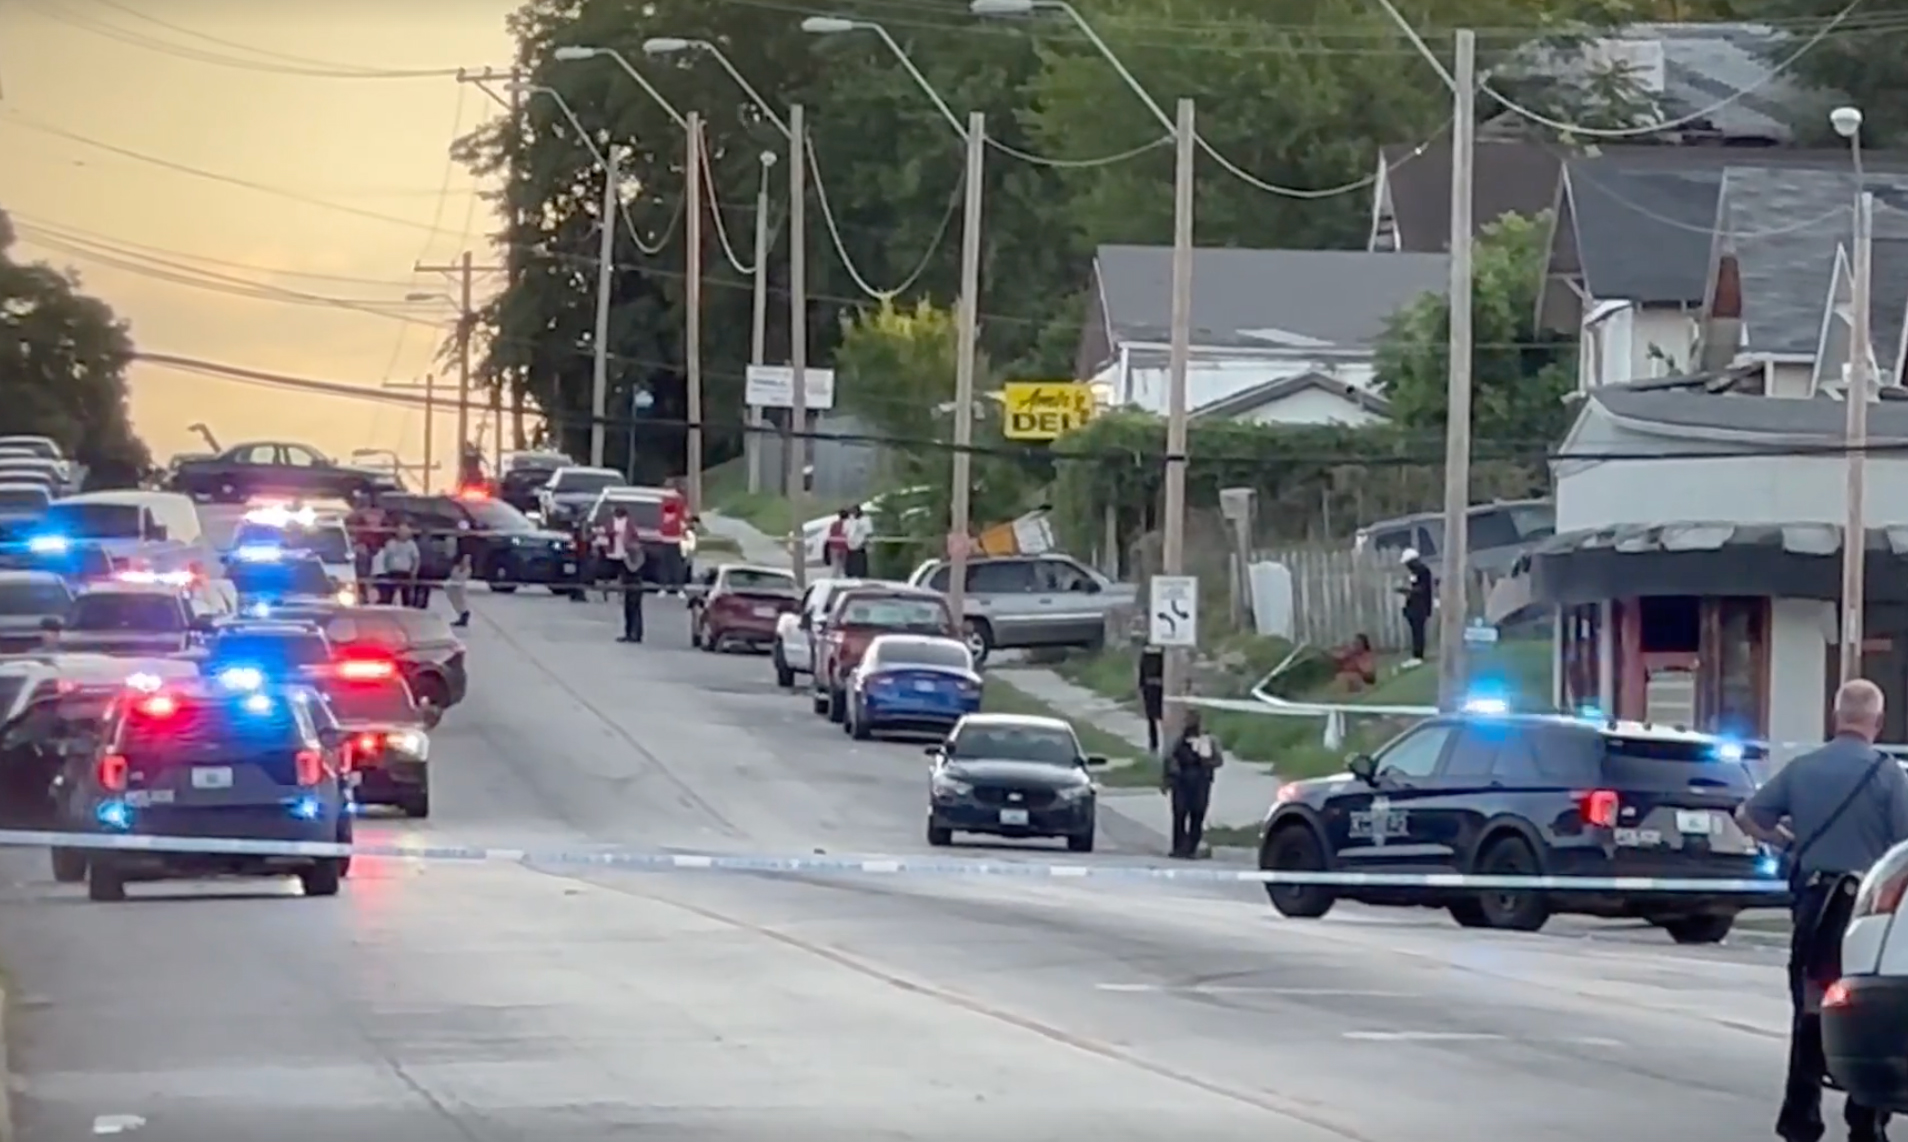 PHOTO: Police block off a street in an area of Kansas City, Mo., on June 25, 2023, after two shootings about 90 minutes apart caused "multiple deaths," according to the Jackson County Sheriff's Office.